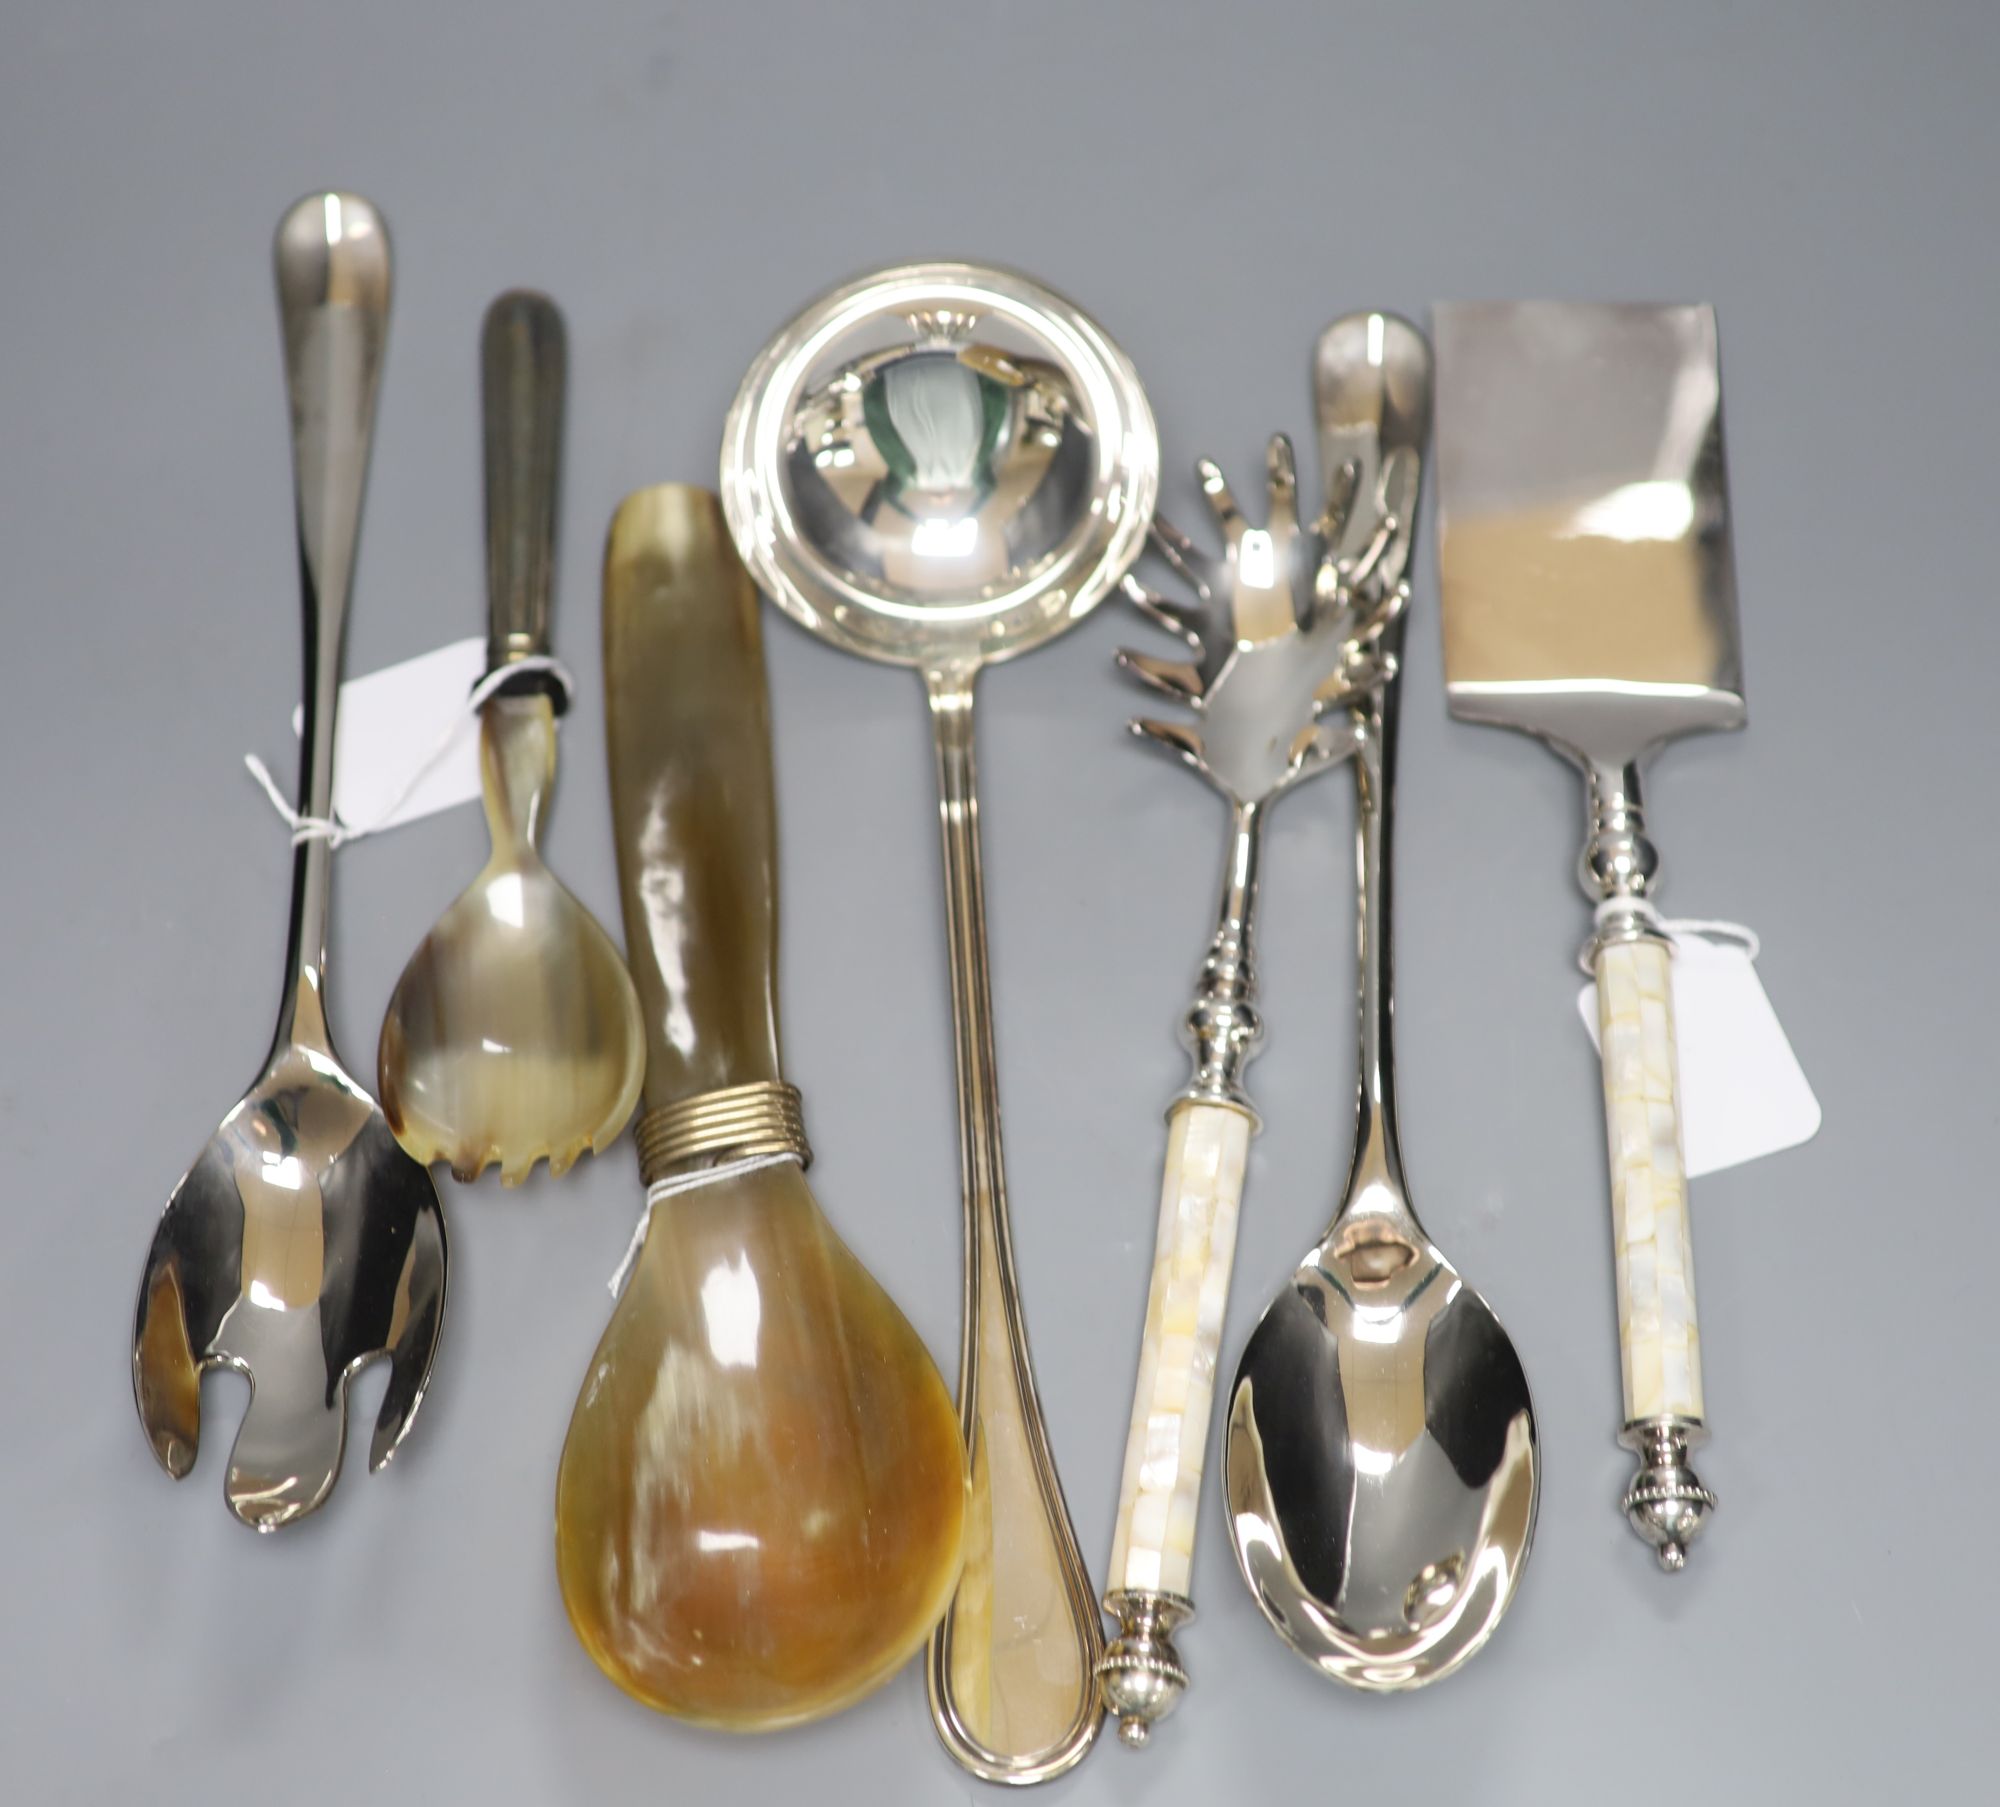 An 800 standard silver ladle and various serving items, including a pair of modern plated salad